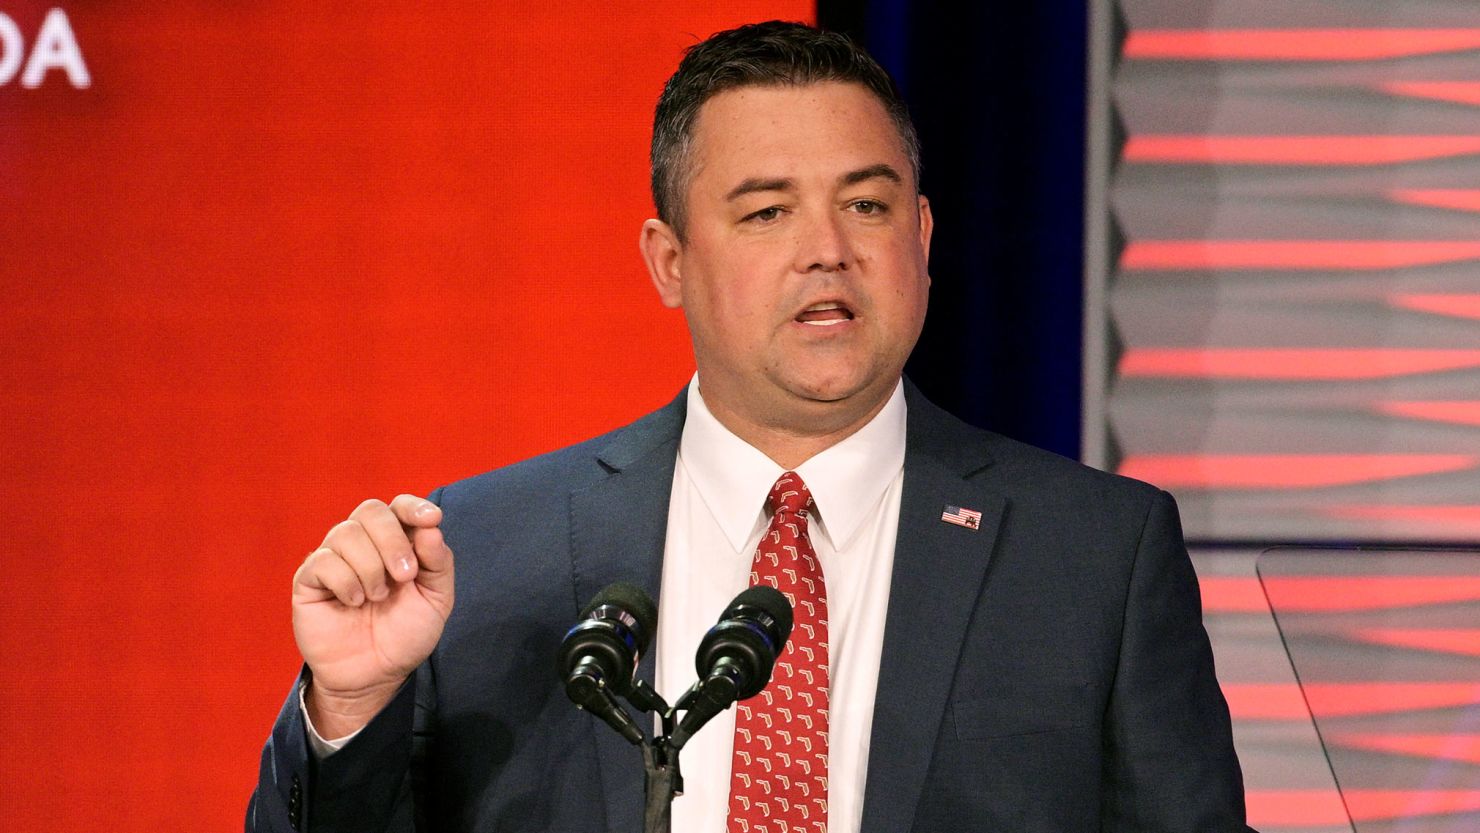 Republican Party of Florida Chairman Christian Ziegler addresses attendees at the Republican Party of Florida Freedom Summit, Saturday, Nov. 4, 2023, in Kissimmee, Fla.